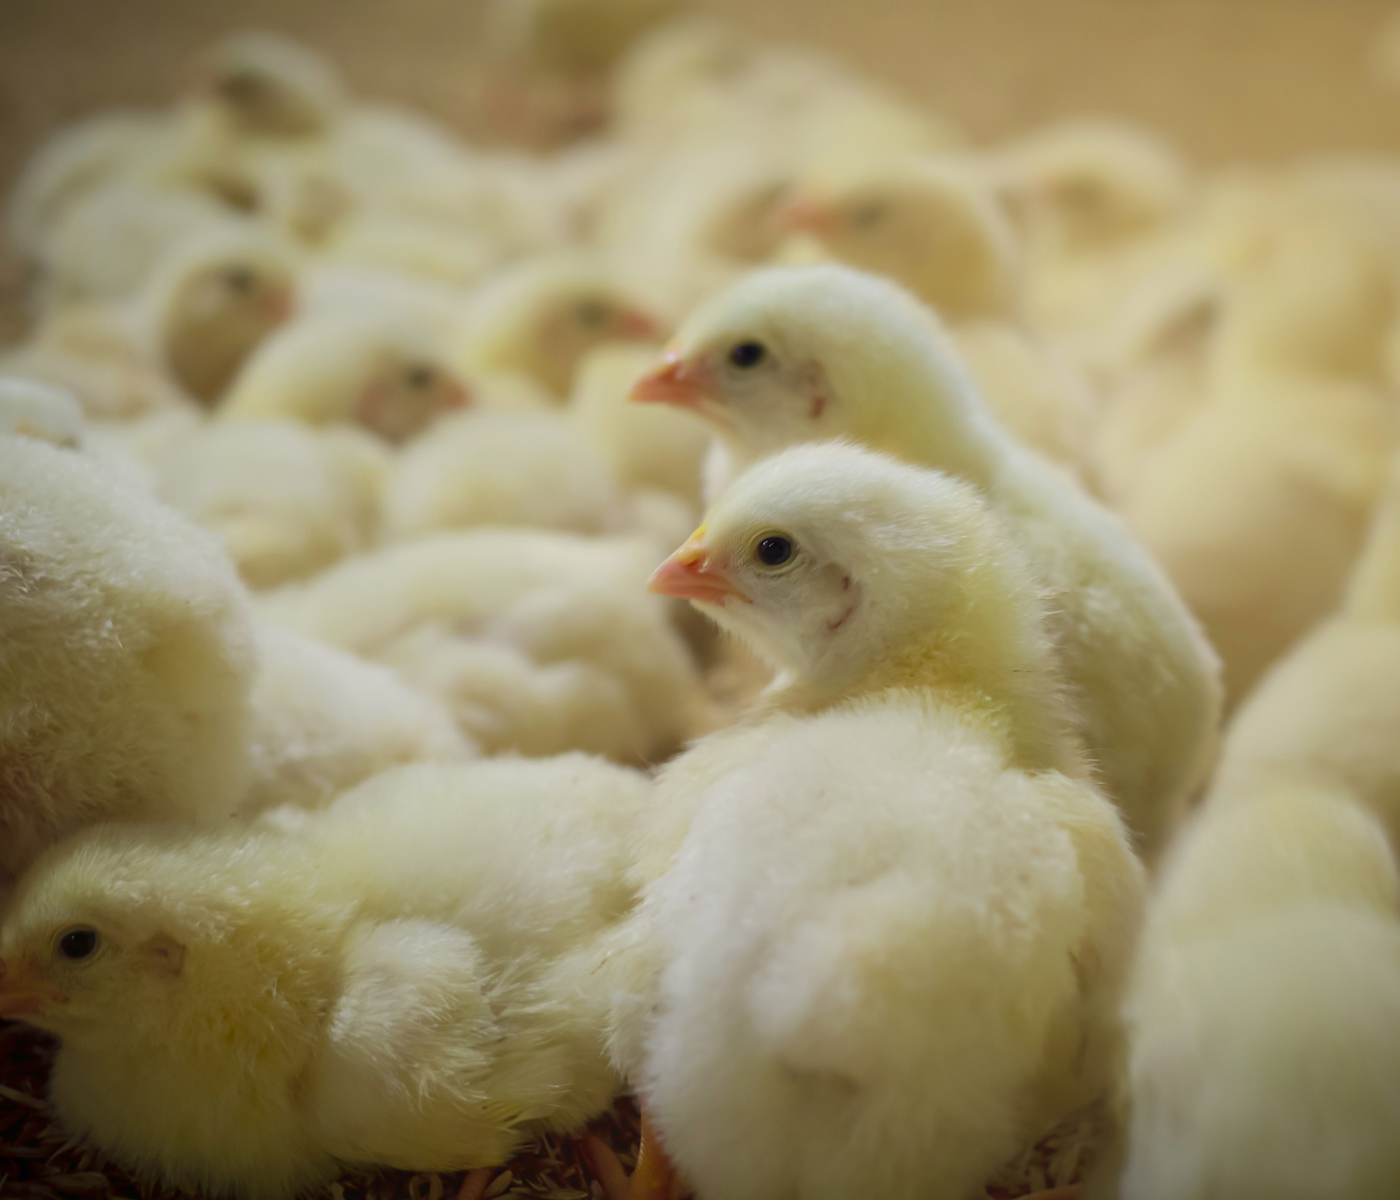 Key points during the rearing phase of broiler breeder pullets